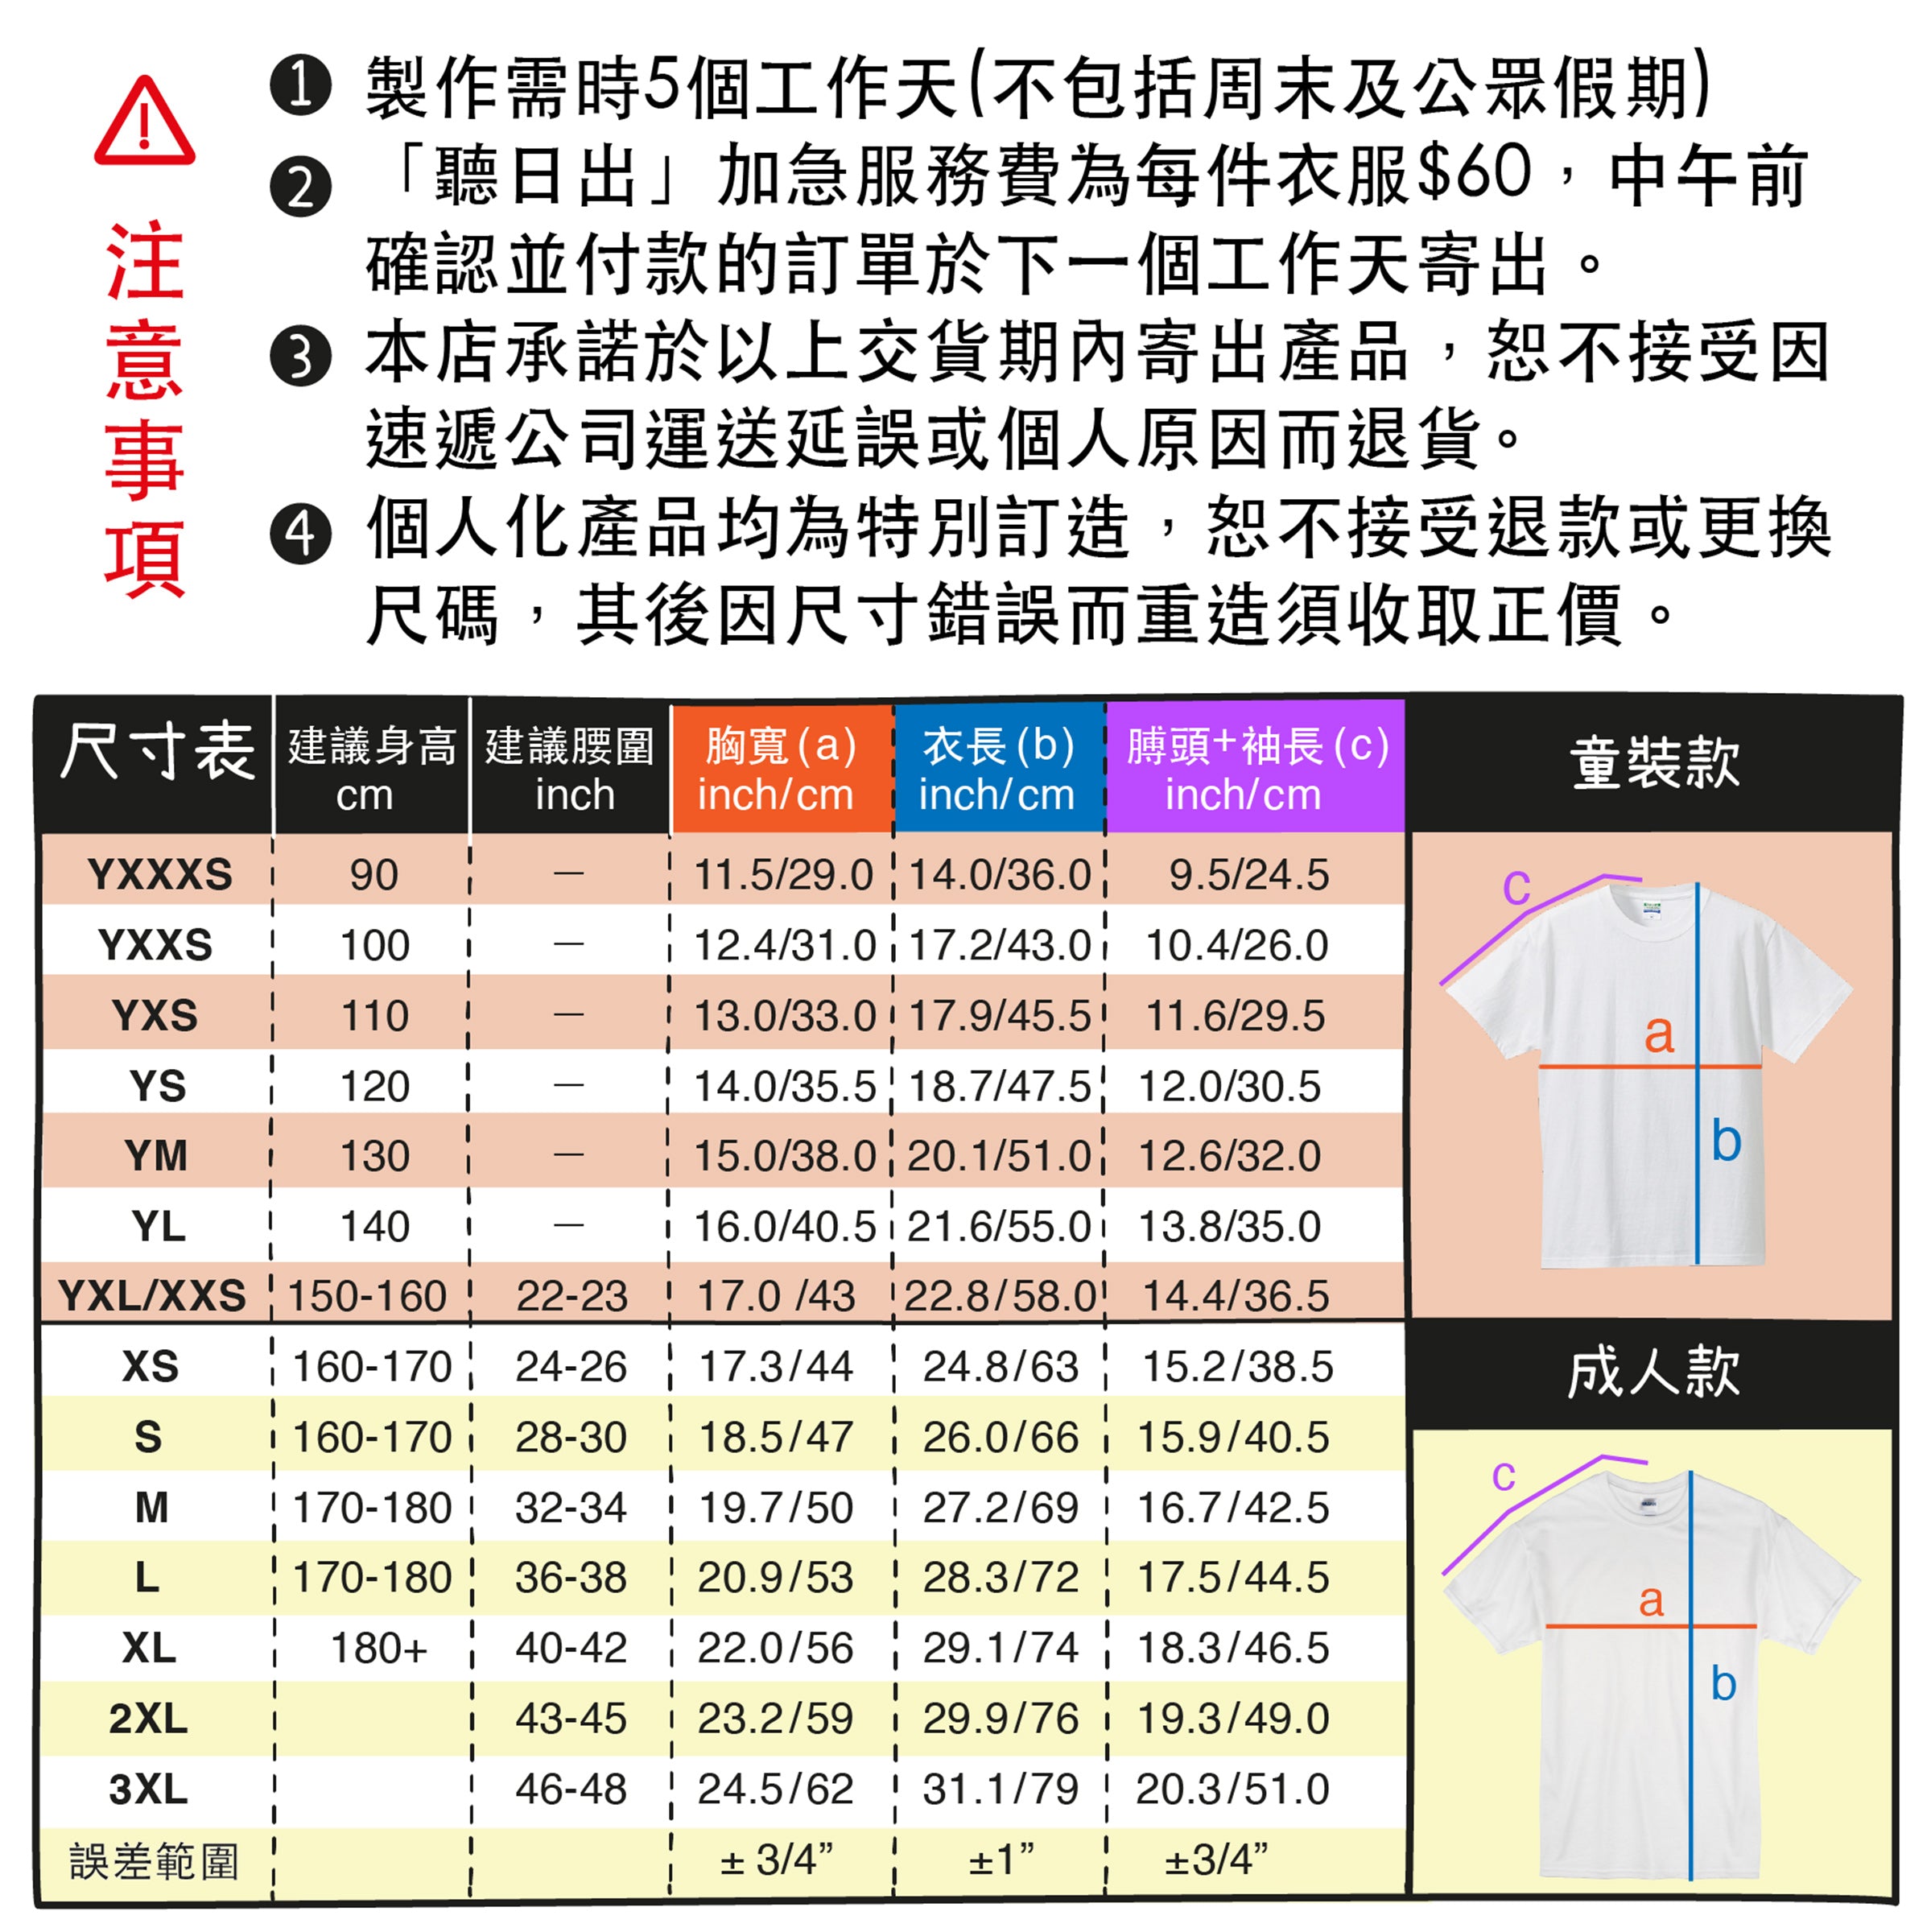 Free Color Matching Couple T-Shirt | 可自由配色情侶T-Shirt Problem&Somebody's Problem